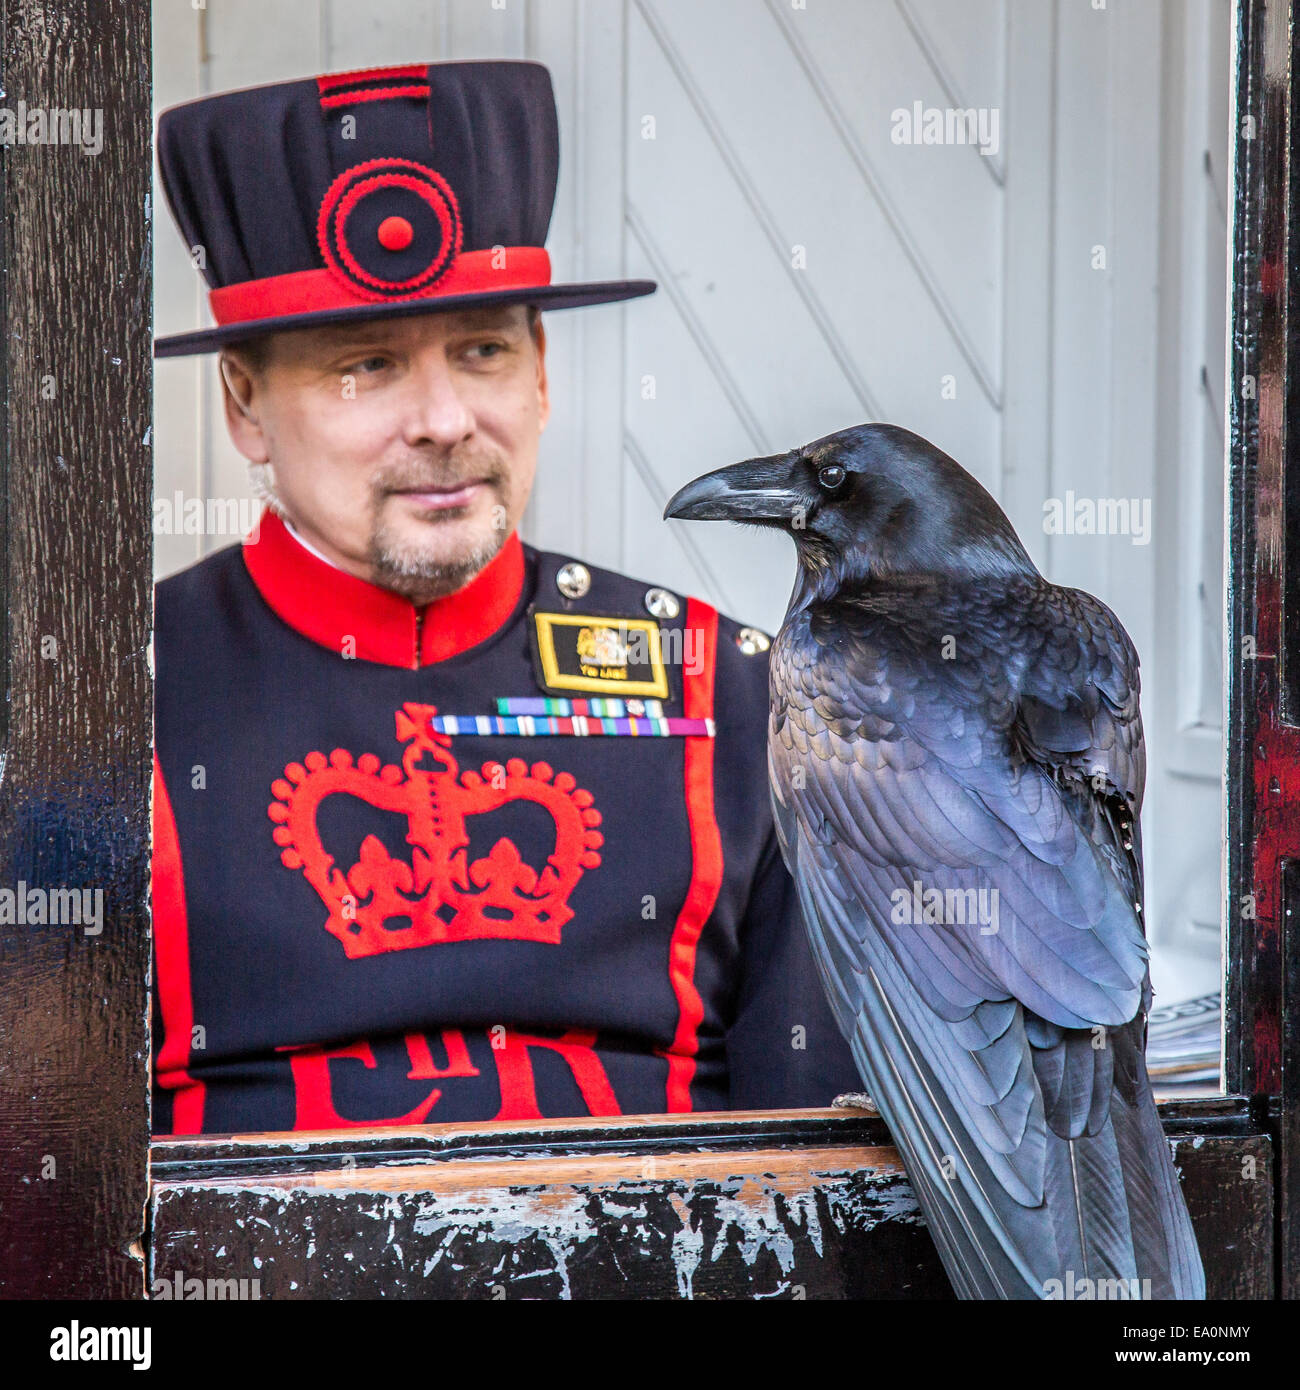 Raven sat watching a Yeoman Warder at The Tower of London, London, England, Europe. Stock Photo